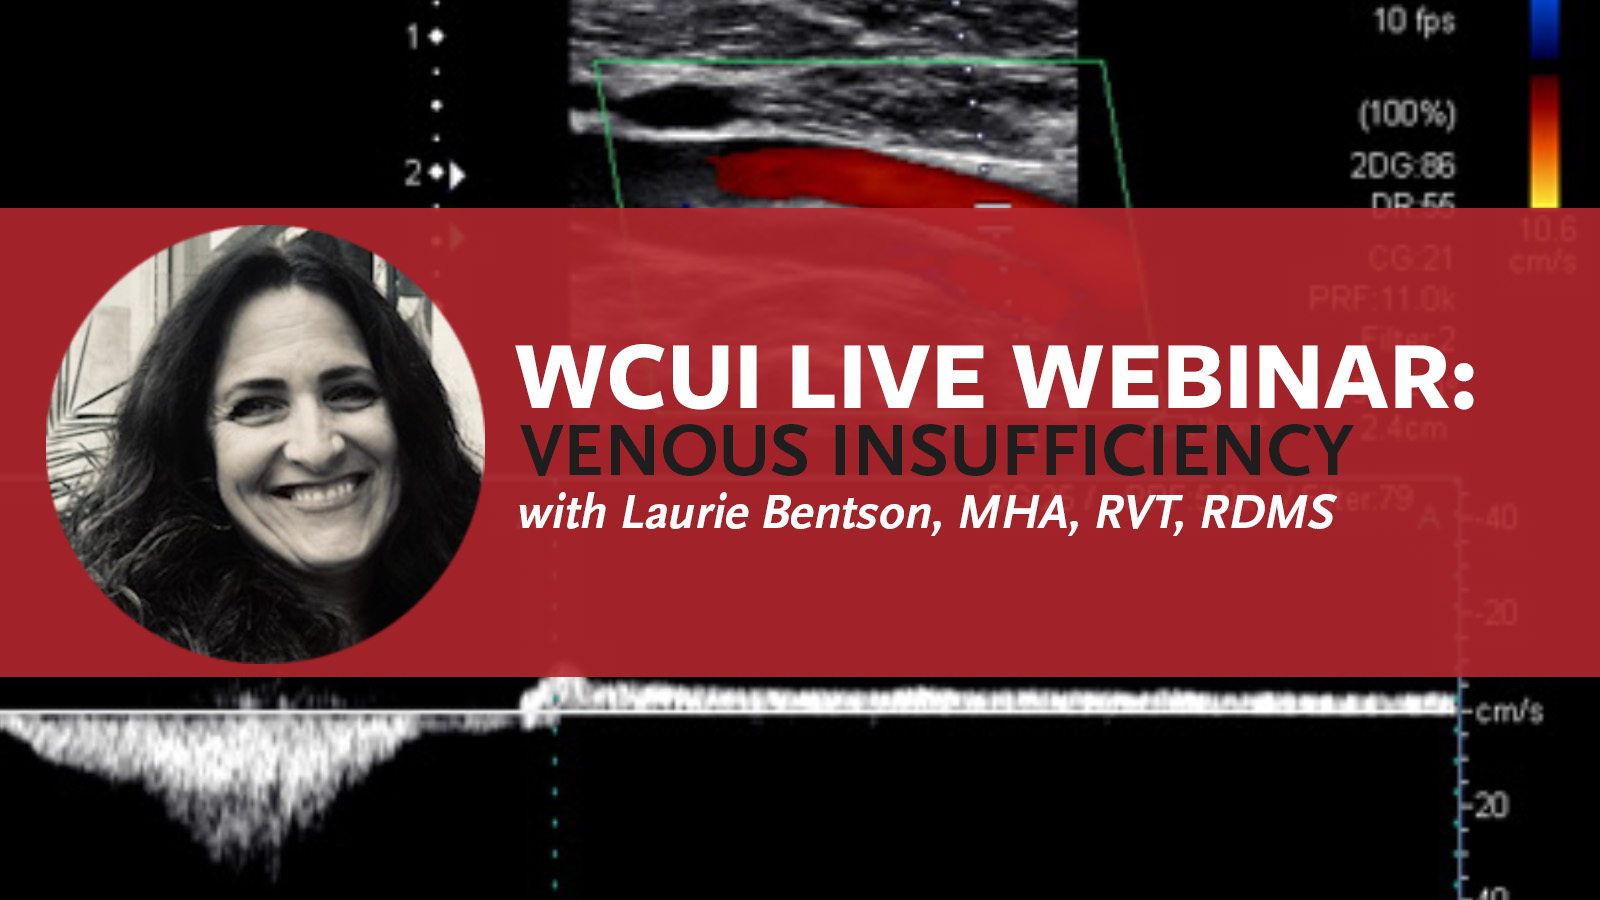 Live Webinar on Venous Insufficiency with Laurie Bentson